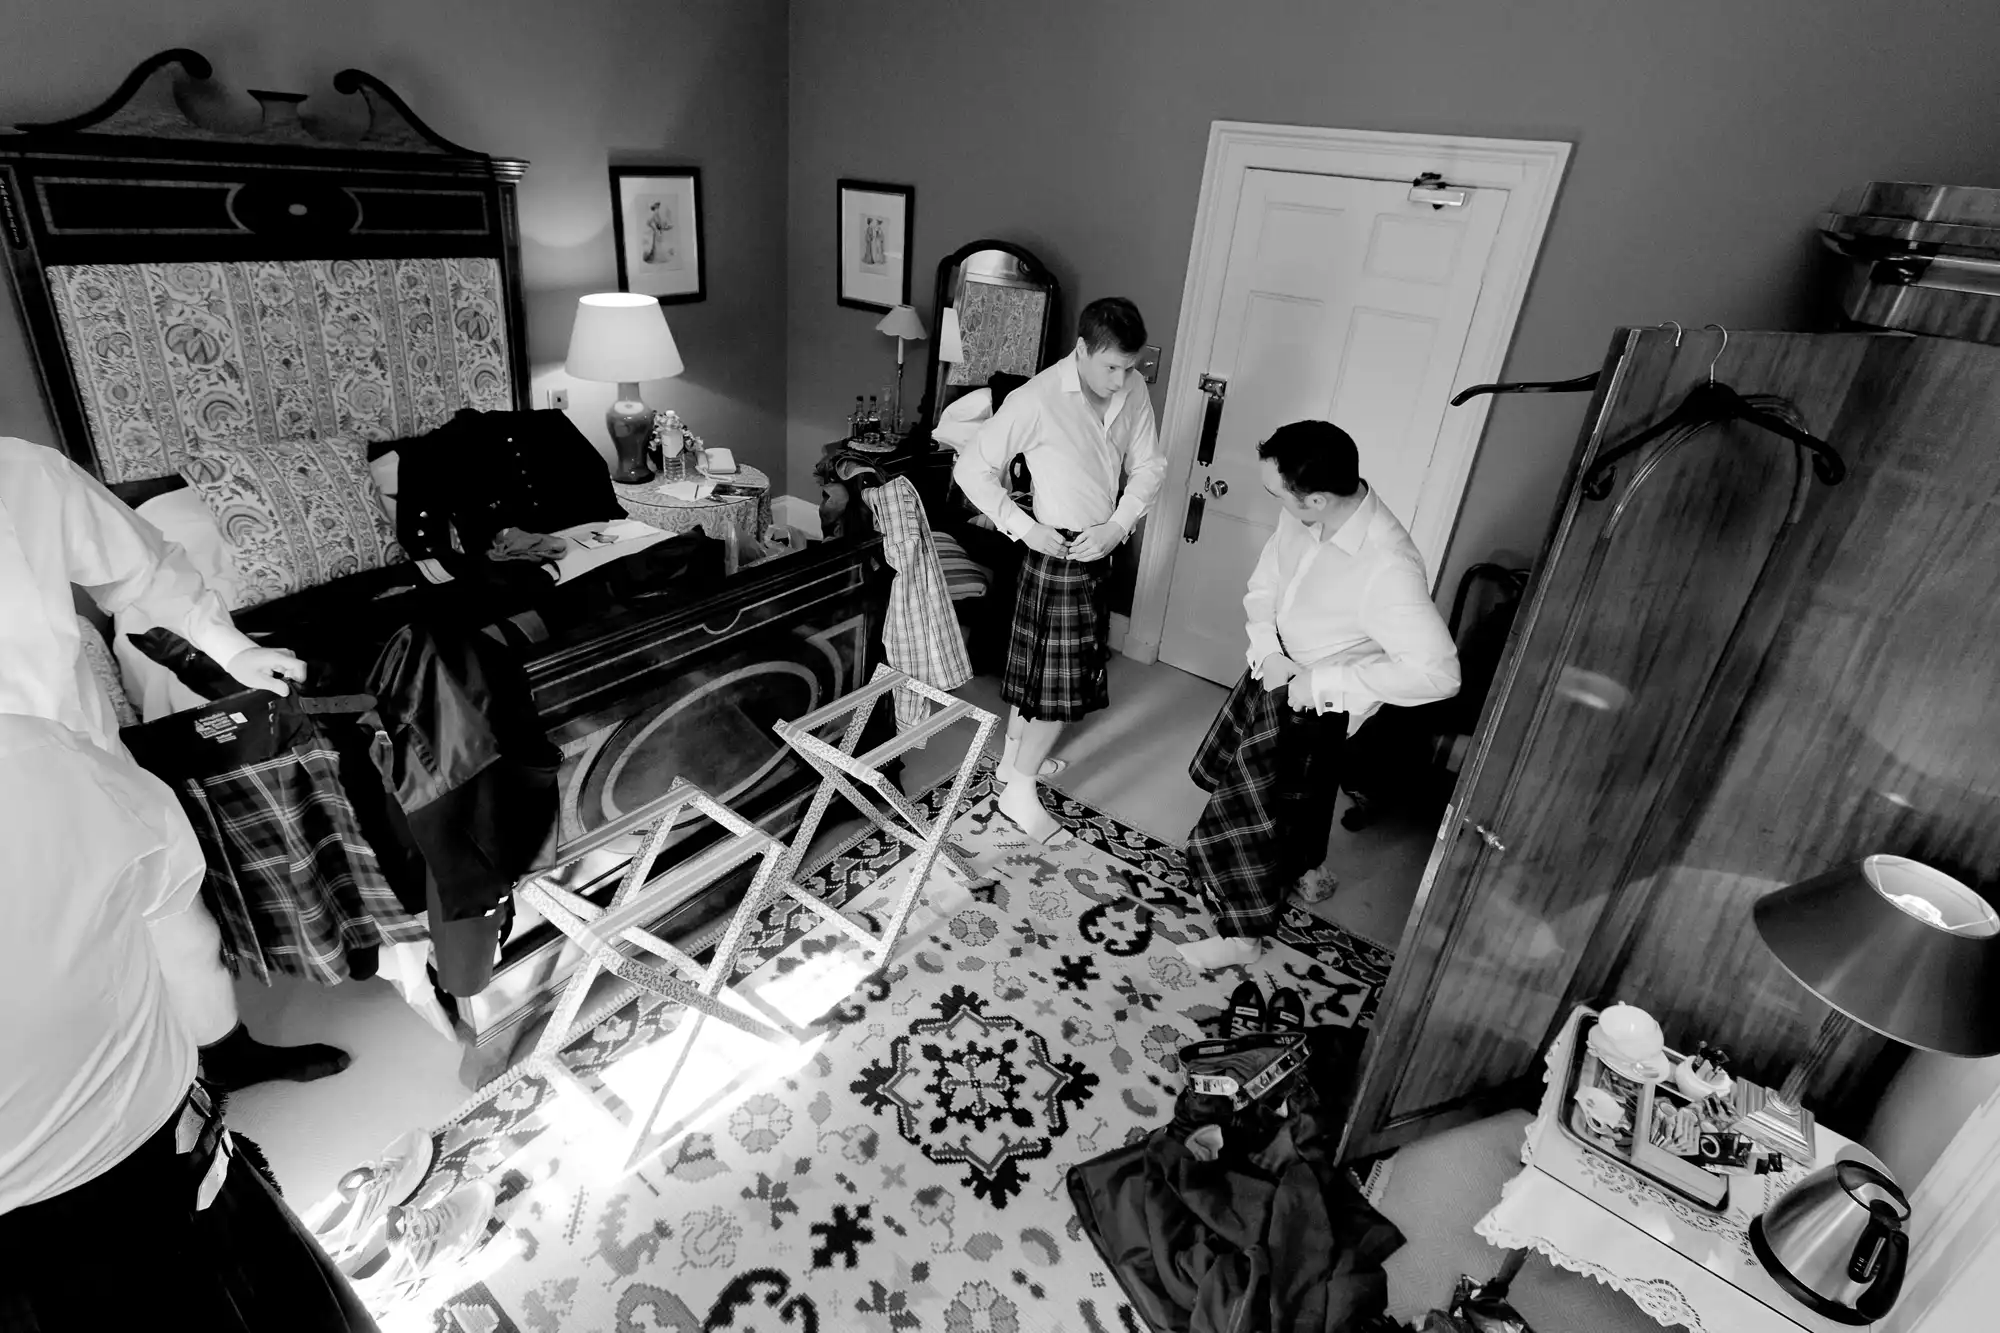 Two men in kilts preparing in a cluttered room, one adjusts the other's attire.